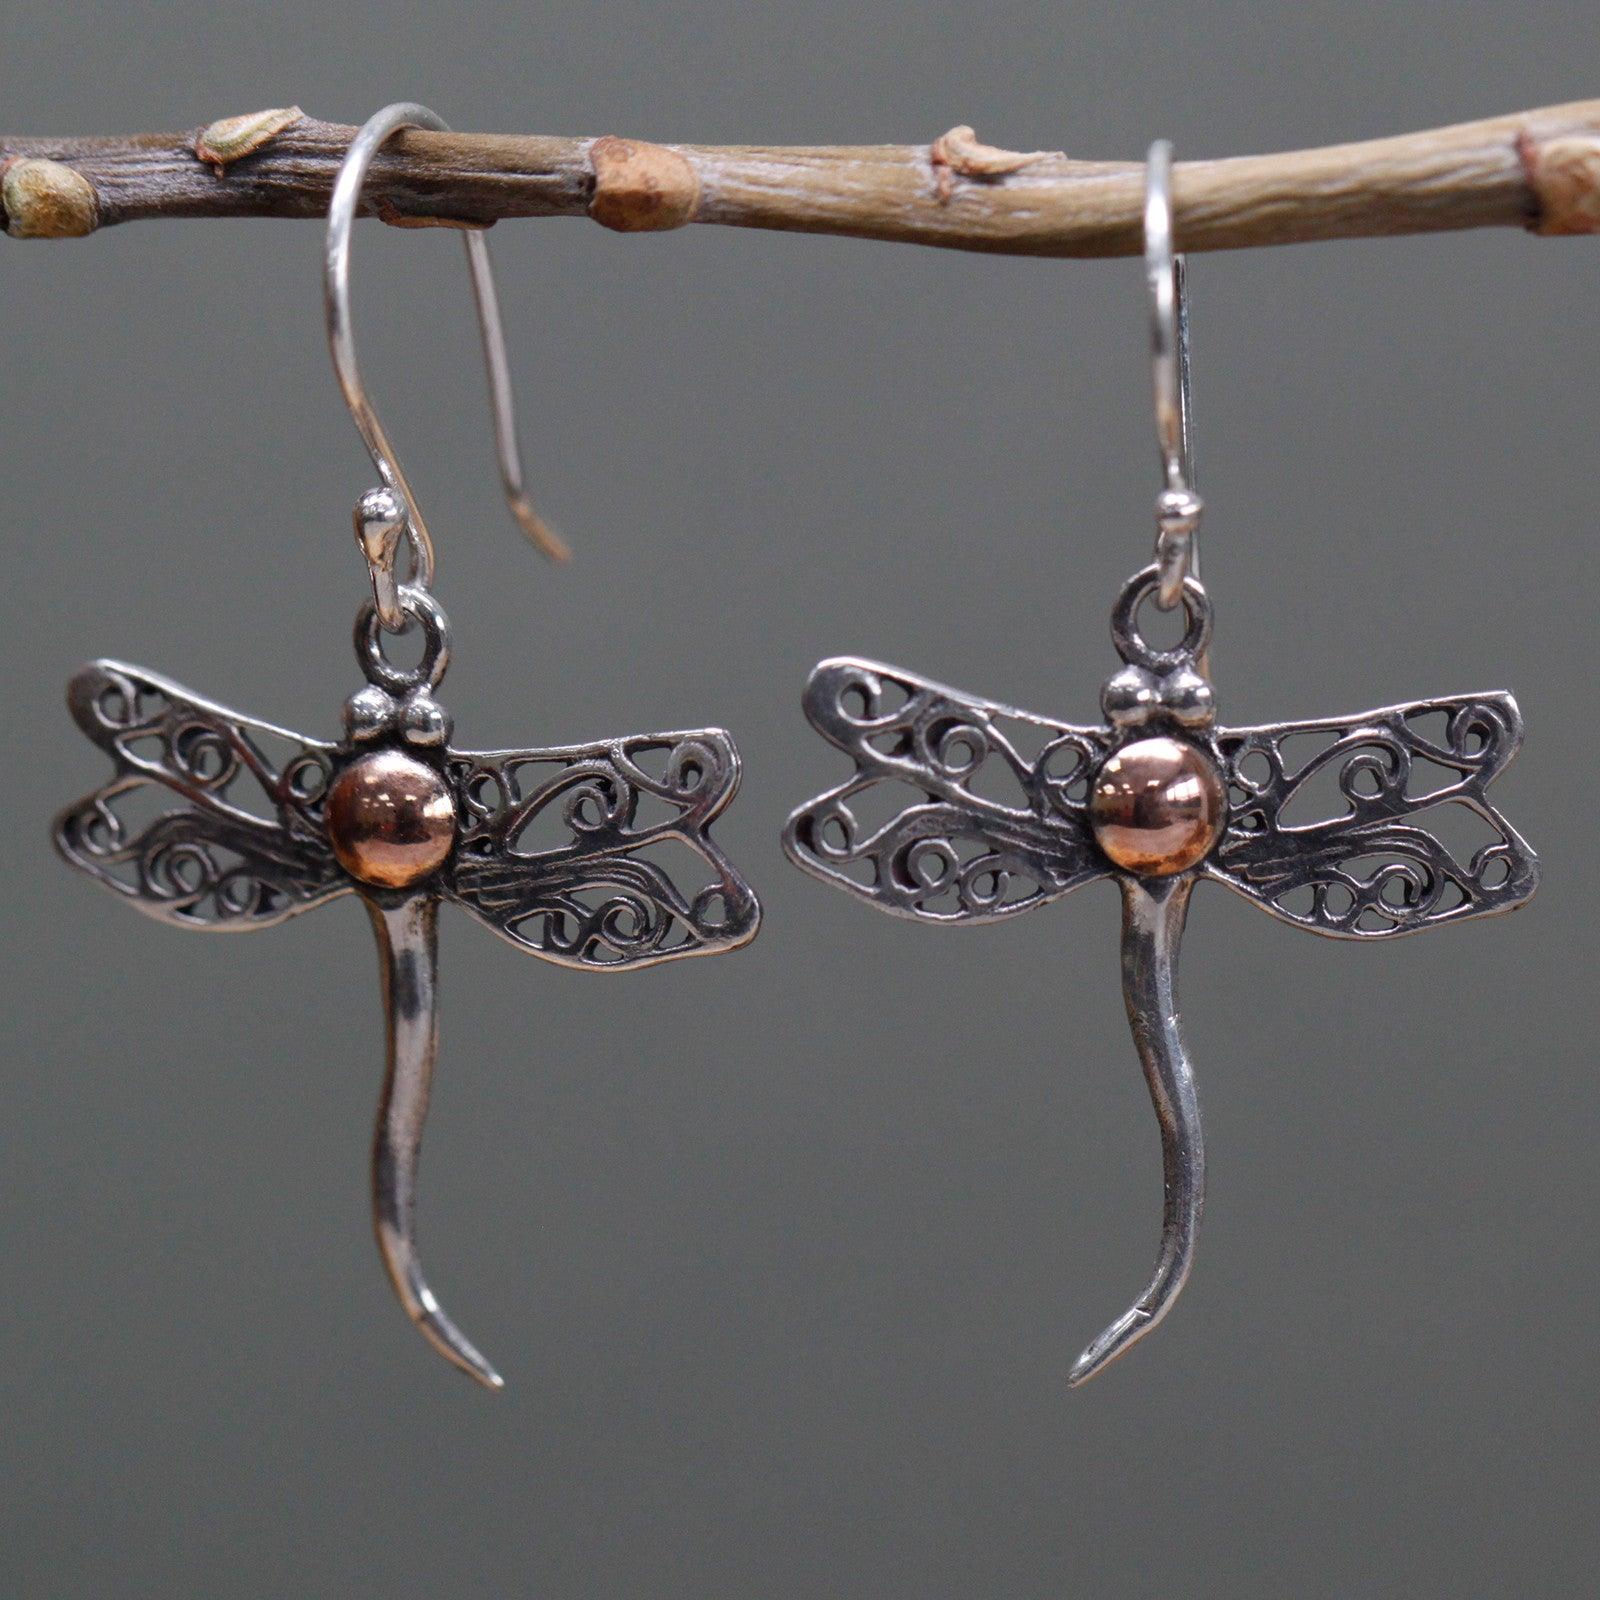 Silver & Gold Earring - Dragonflies - Charming Spaces